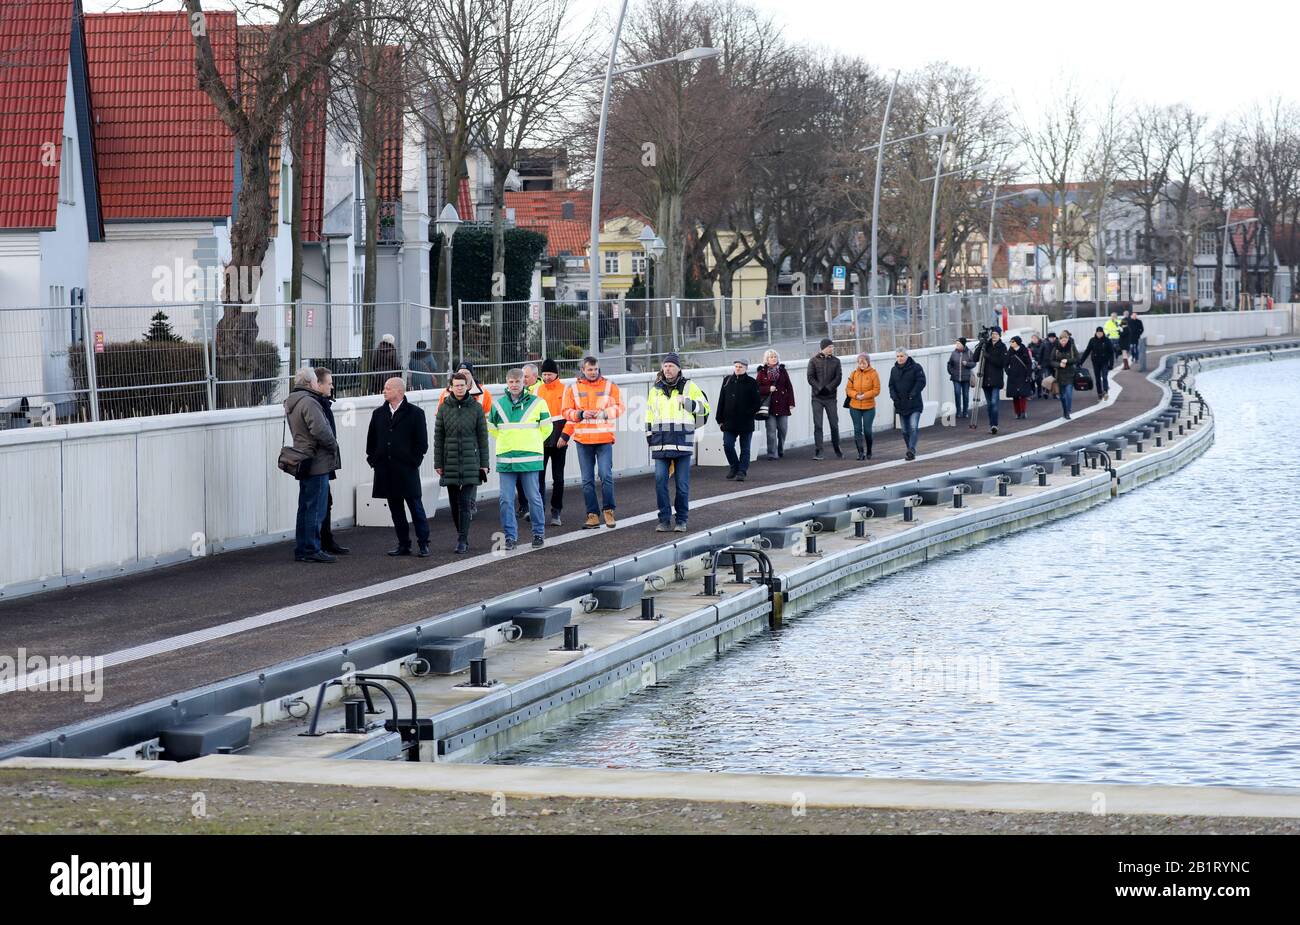 27 February 2020, Mecklenburg-Western Pomerania, Warnemünde: The promenade at the new storm surge barrier at the southern end of Alter Strom has been opened to the public after a good two years of construction. The 500-metre long protective wall was officially handed over on 10.01.2020, and now the promenade along the wall is also finished and accessible. Photo: Bernd Wüstneck/dpa-Zentralbild/ZB Stock Photo